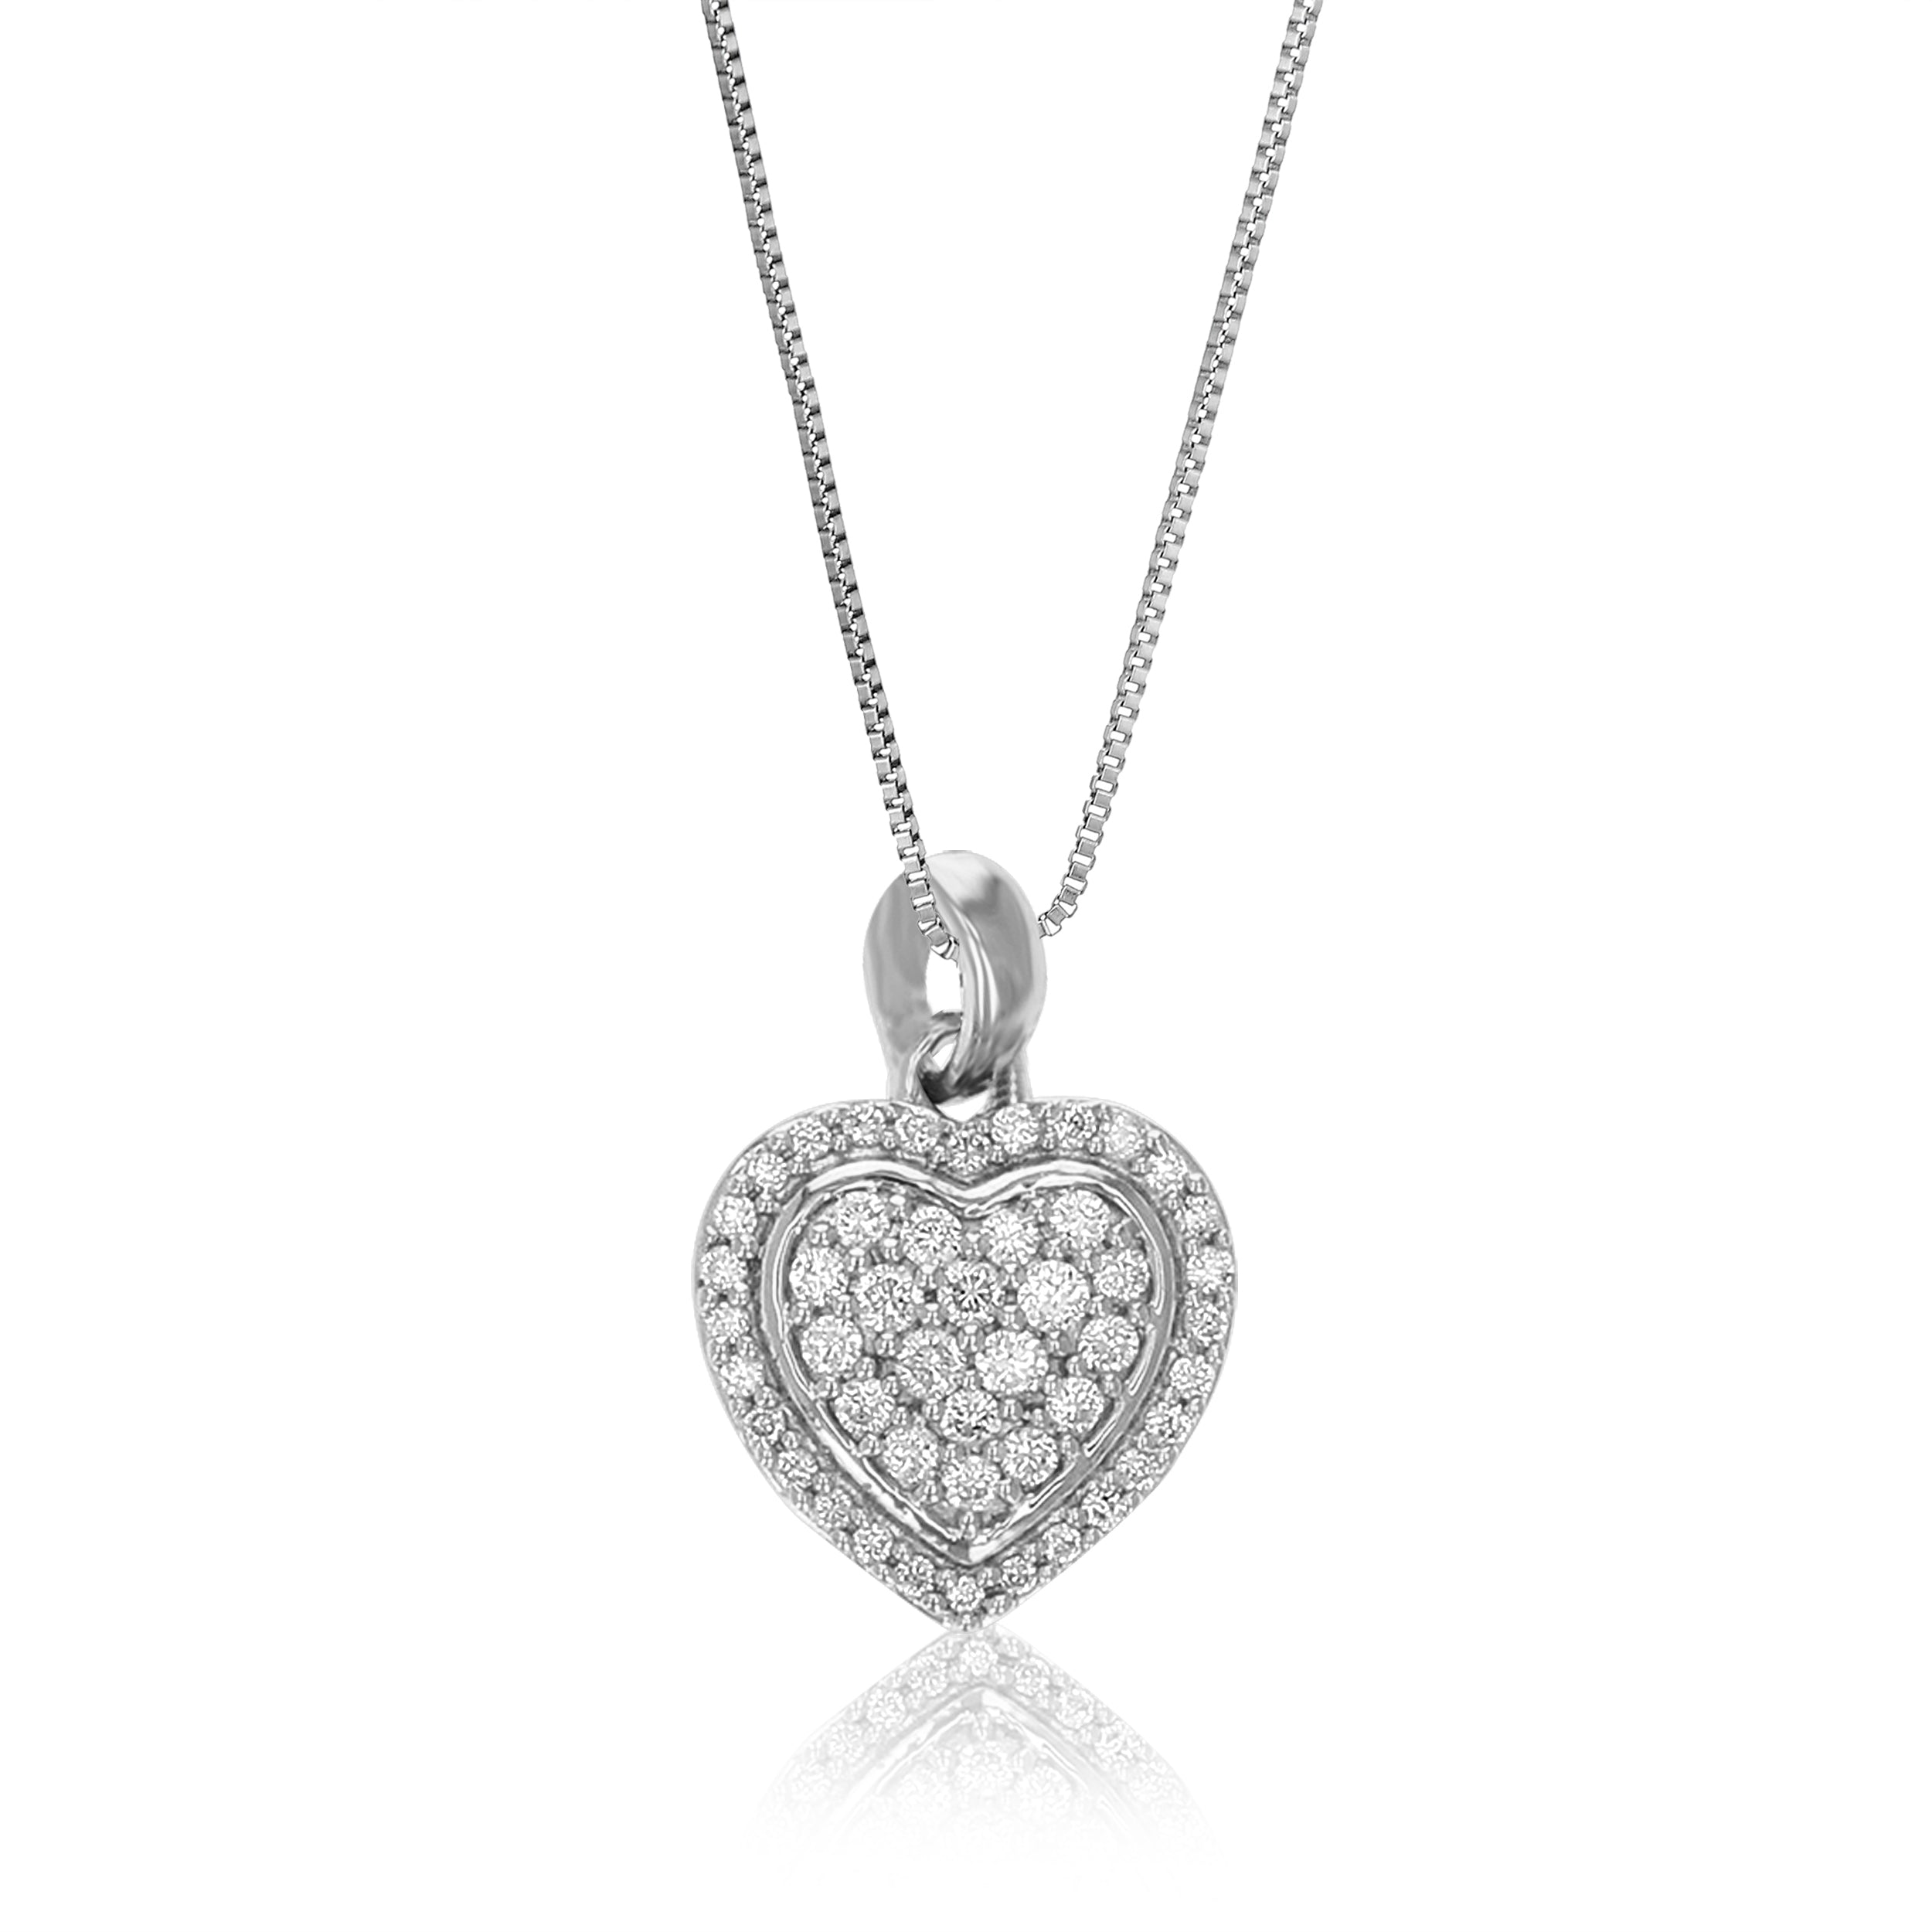 1/4 cttw Diamond Pendant Necklace for Women, Lab Grown Diamond Heart Pendant Necklace in .925 Sterling Silver with Chain, Size 2/3 Inch